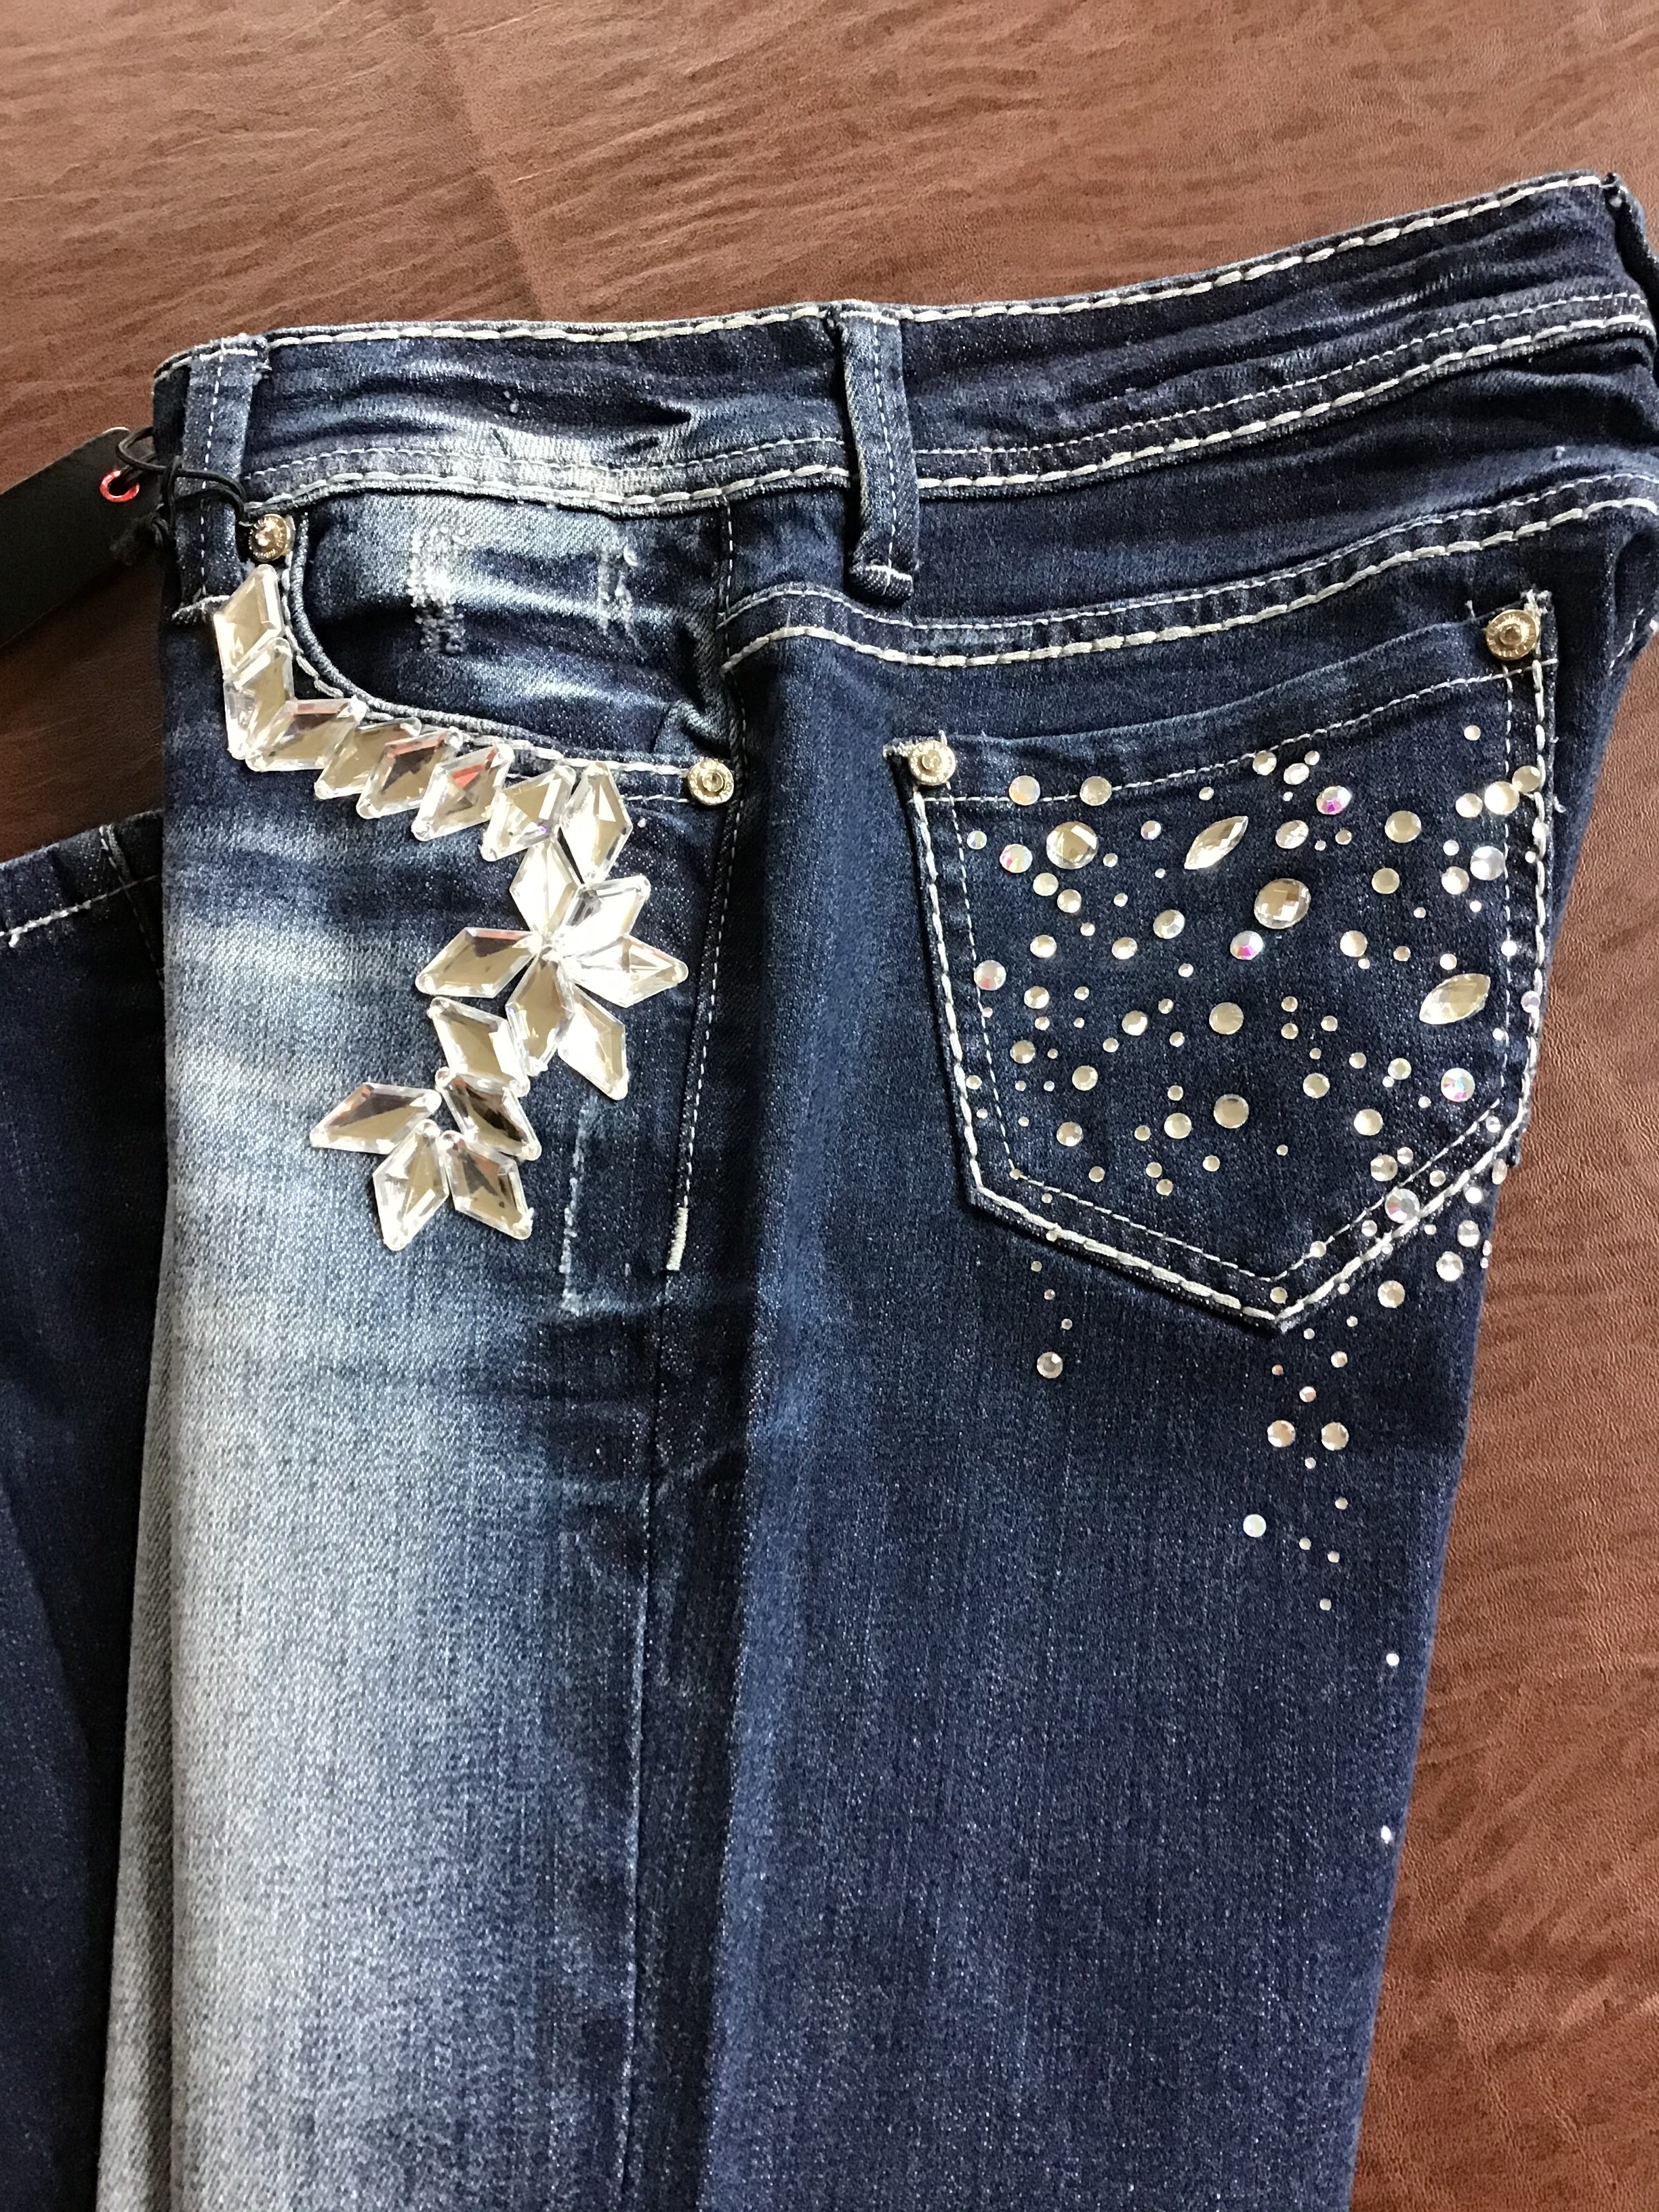 Womens bling Jeans straight leg crystals along front pockets and